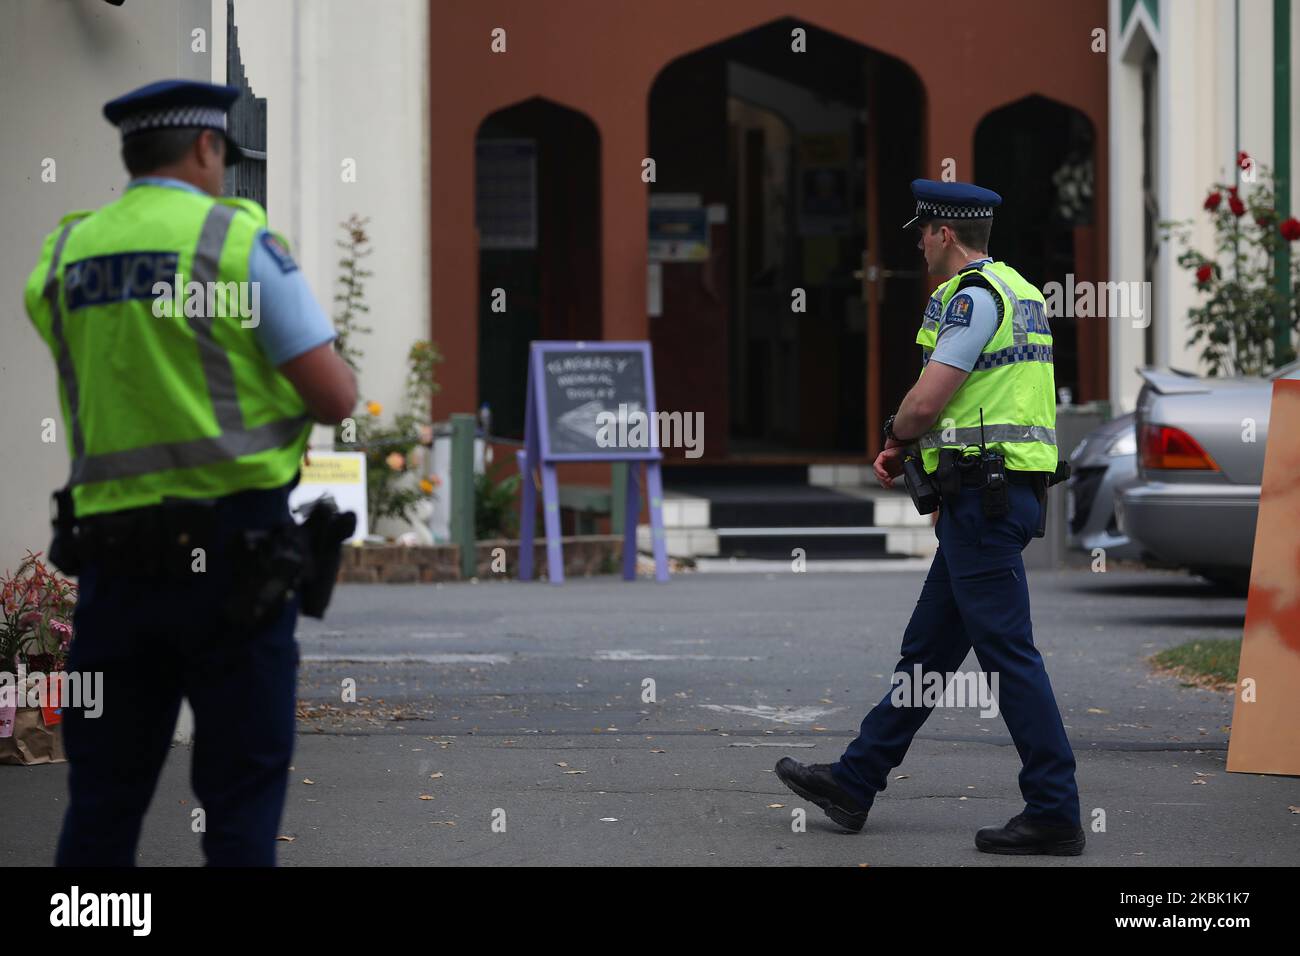 Police officersÂ patrol outside the Al Noor mosque in Christchurch, New Zealand on March 15, 2020. On March 15 last year, 51 people died and 49 were injured in the shootings at Christchurch's Al Noor and Linwood MosquesÂ when a gunman opened fire on worshippers.Â It was labeled as New Zealand's 'darkest day'.Â Events around the country including the Christchurch National Remembrance Service which marking the first anniversary of the attacks has been canceled amid safety fears over Covid-19.Â (Photo by Sanka Vidanagama/NurPhoto) Stock Photo